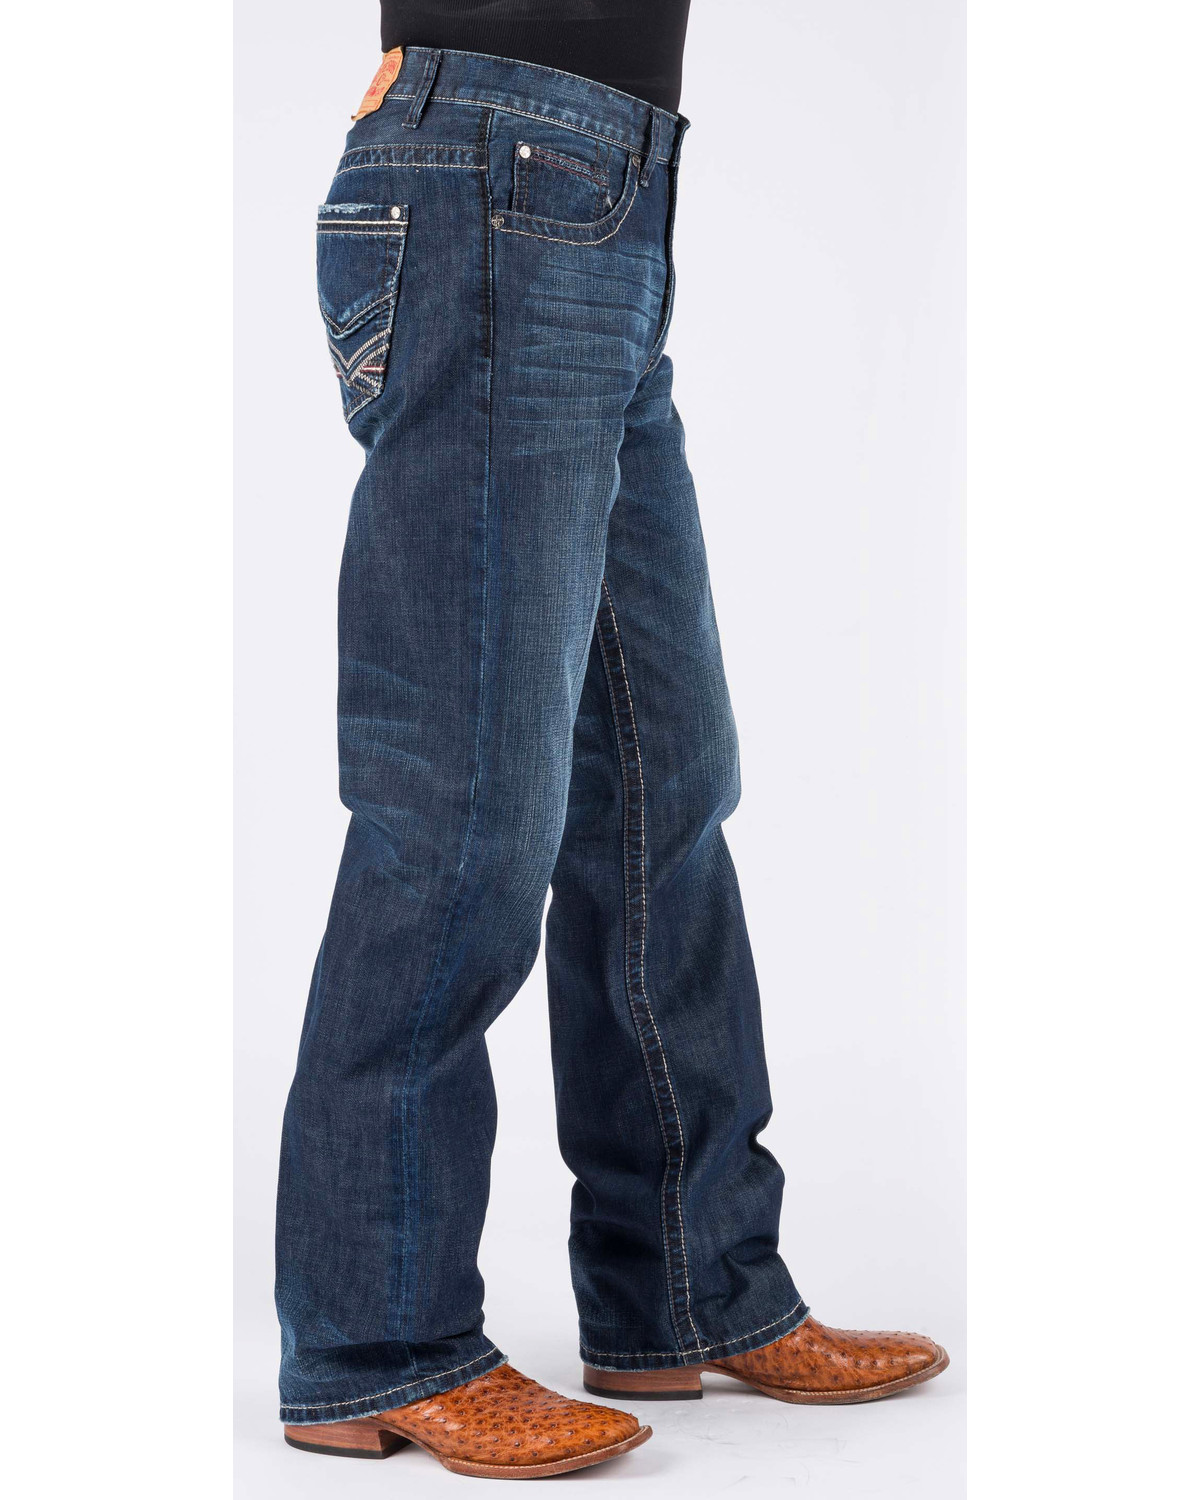 Stetson Men's 1312 Modern Fit Jeans - Boot Cut - Country Outfitter